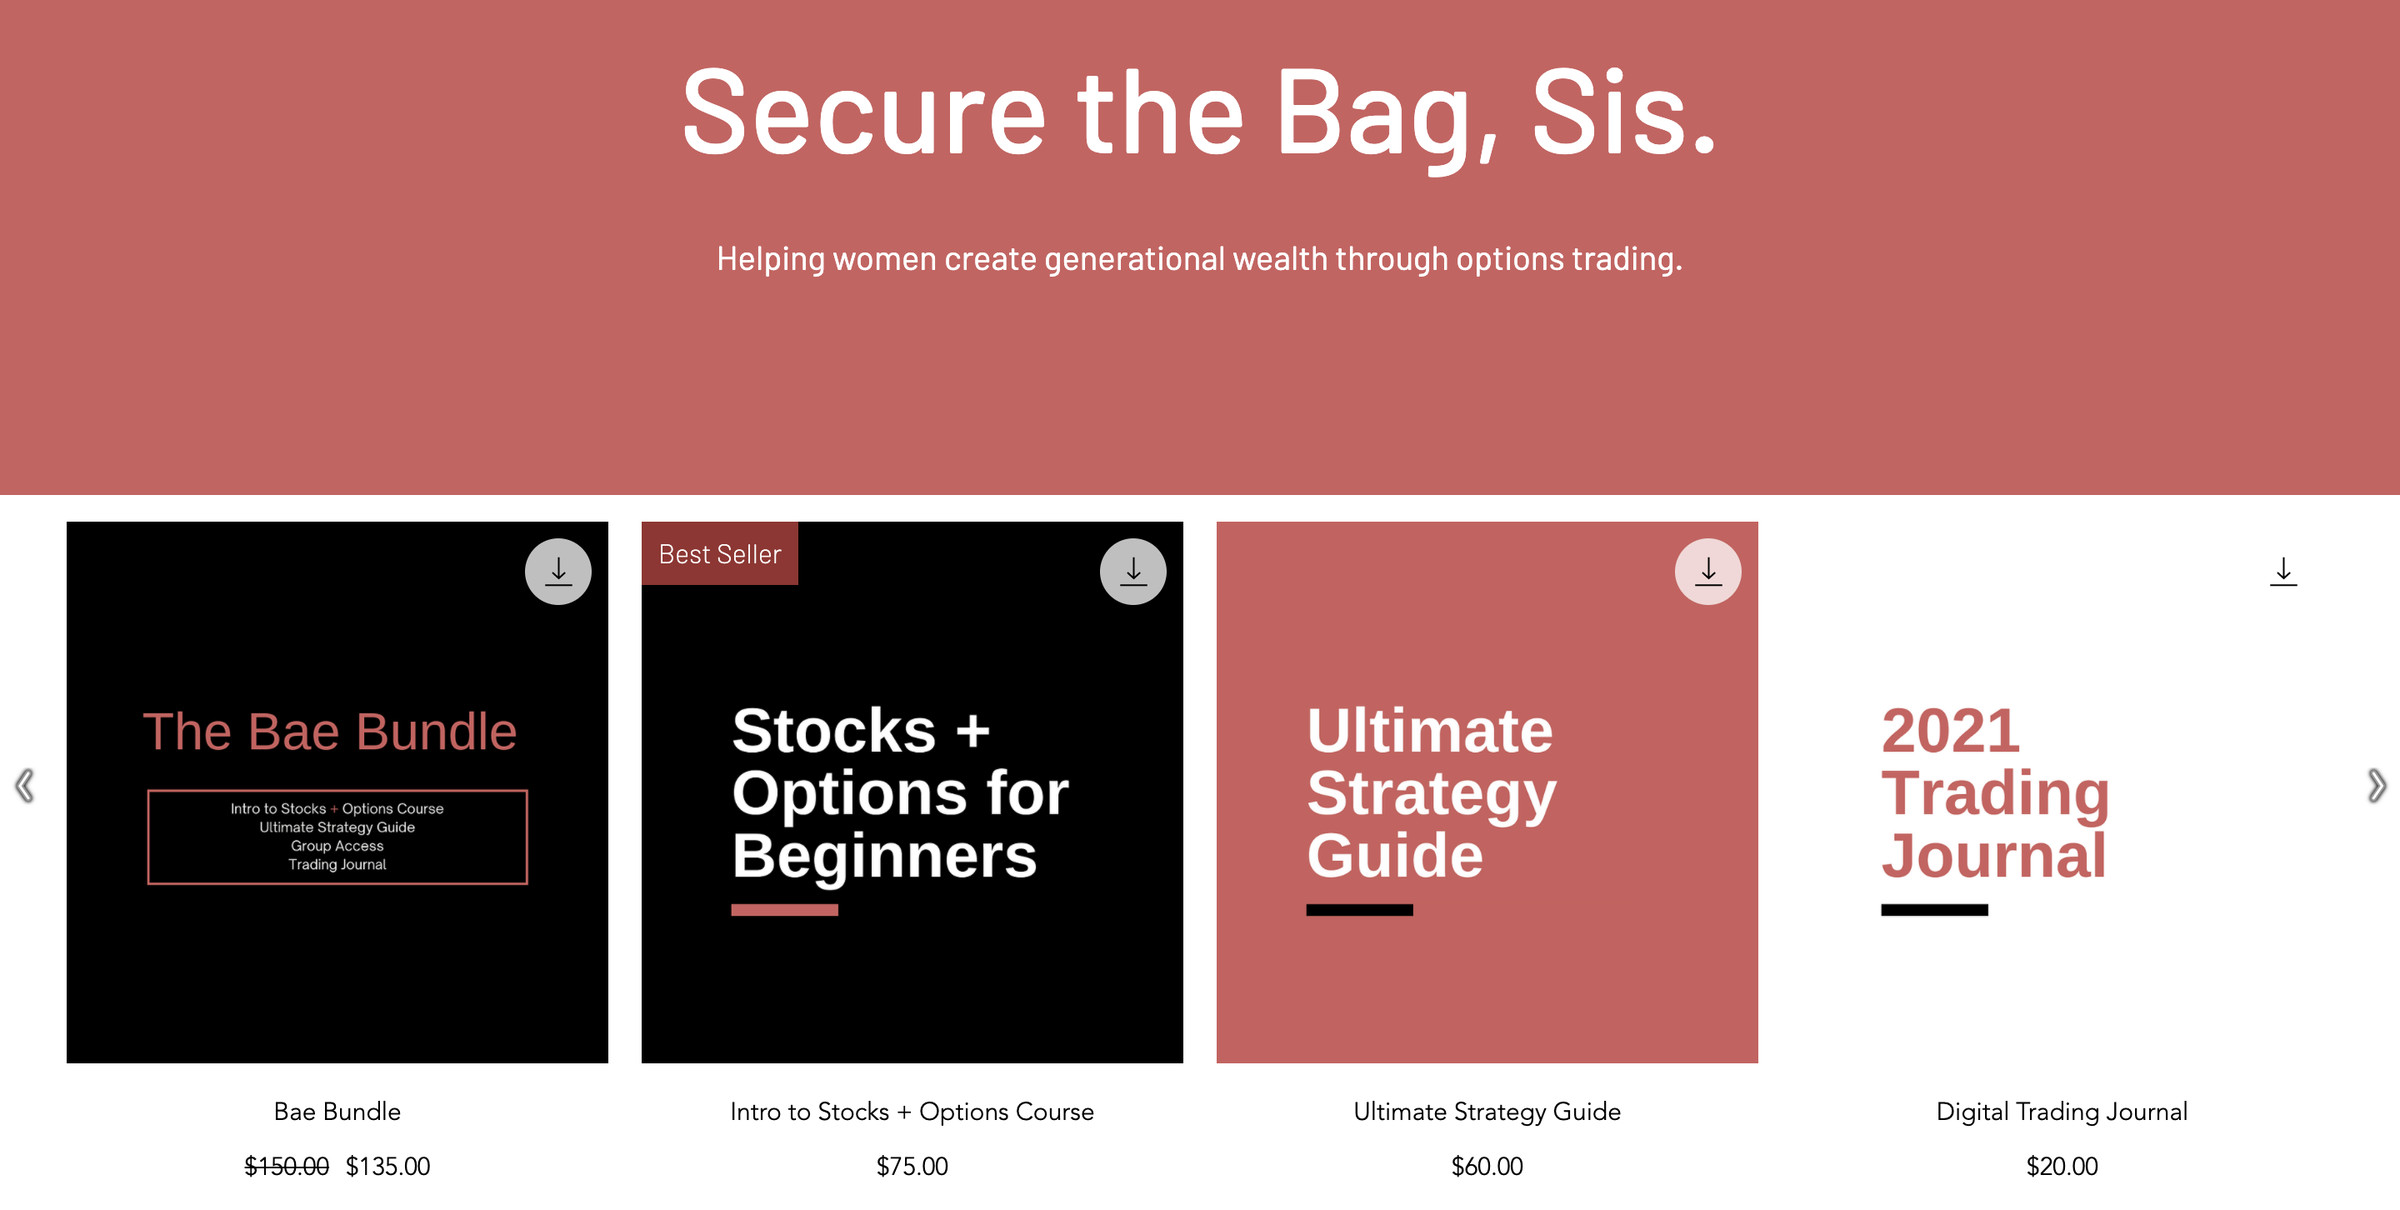 A website reading “Secure the Bag, Sis. Helping women create generational wealth through options trading.” The page shows several course options including “Bae Bundle,” “Stock and Options for Beginners,” and “Ultimate Strategy Guide,” with prices reaching up to $135.